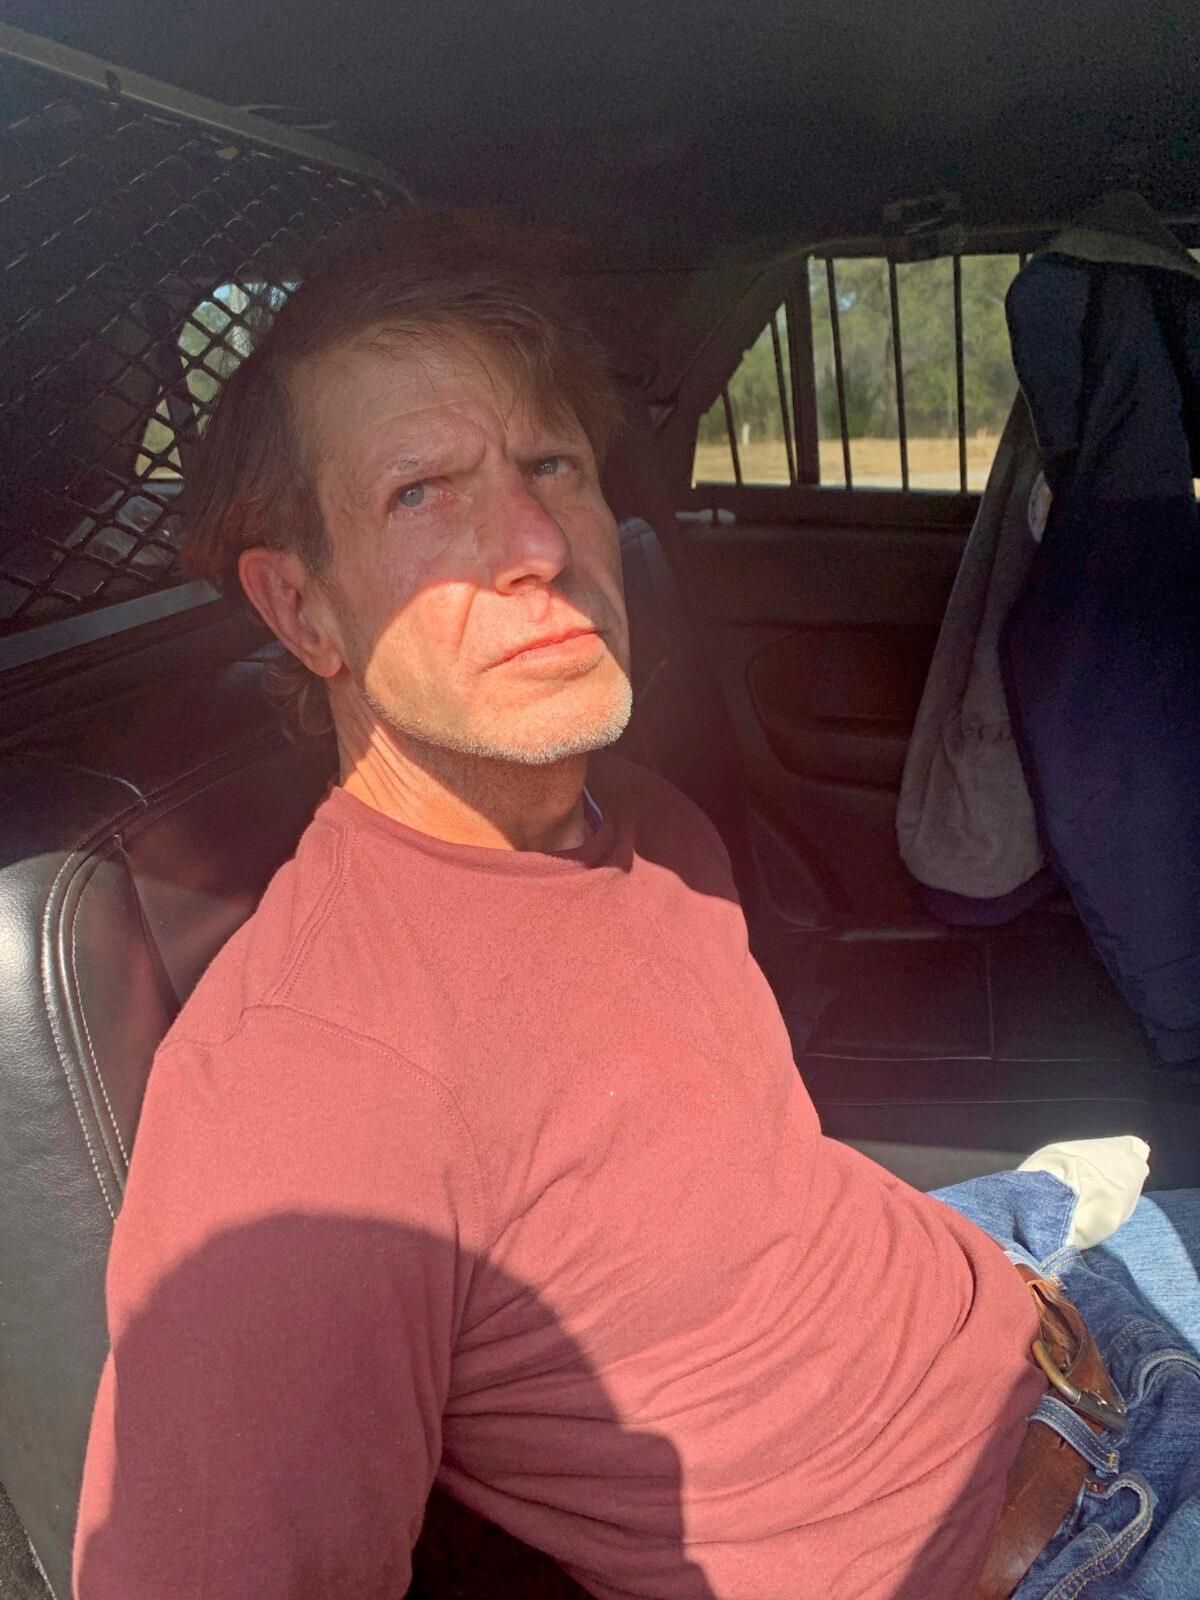 Michael Floyd Wilson, an inmate who escaped from the Central Mississippi Correctional Facility, is shown in custody in this photo provided to media outlets by the Harrison County Sheriff's Office, taken after he was captured on Feb. 15, 2022. (Harrison County Sheriff's Office via AP)